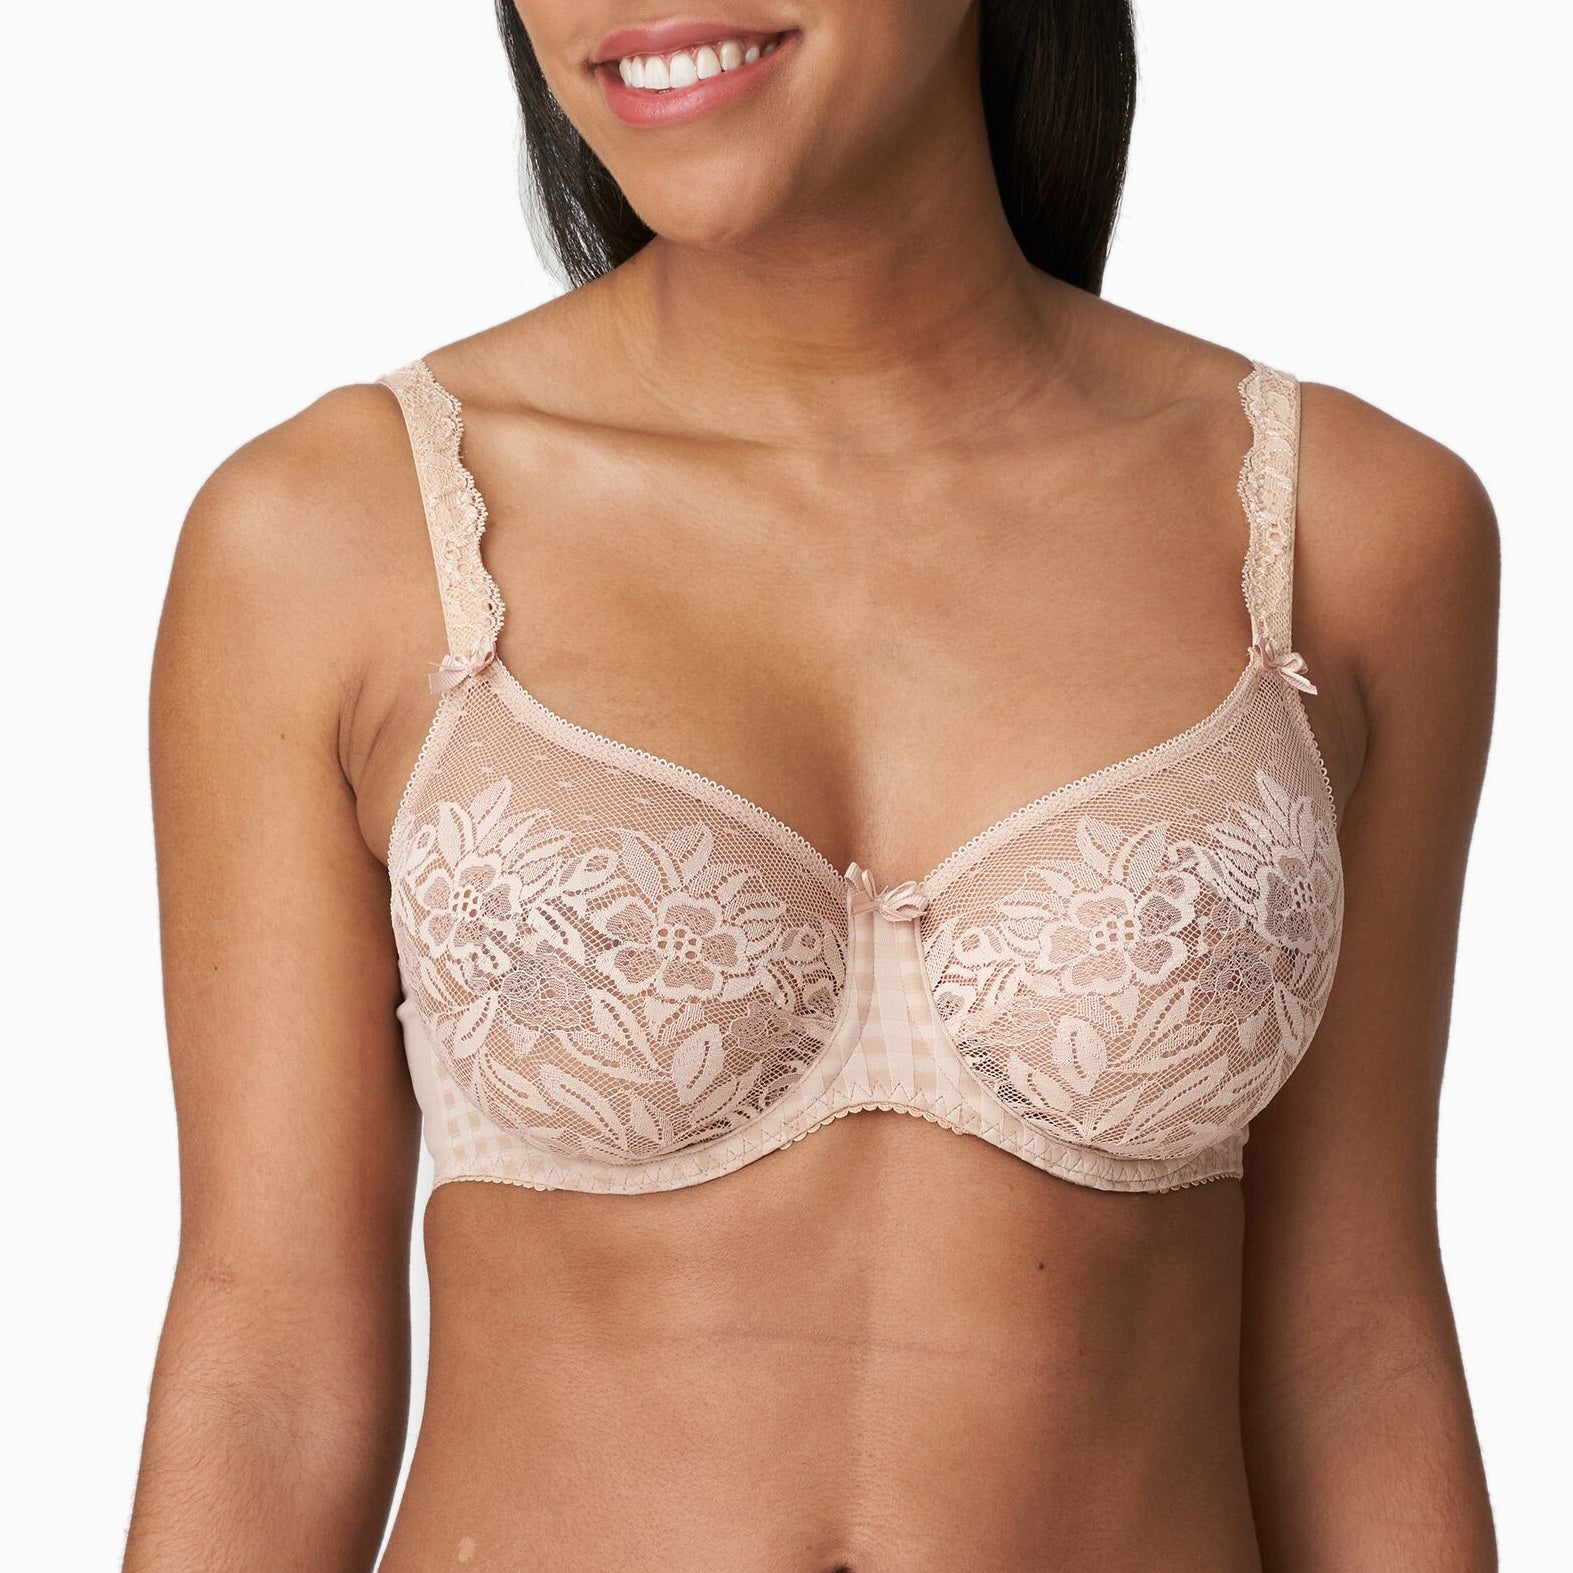 Buy A1 UNIQUE Women's Polly Cotton Bra, Padded, Non Wired Bra, T-Shirt Bra  For Women And Girls, Everyday, Regular Style Bra, Seamless, Full Coverage